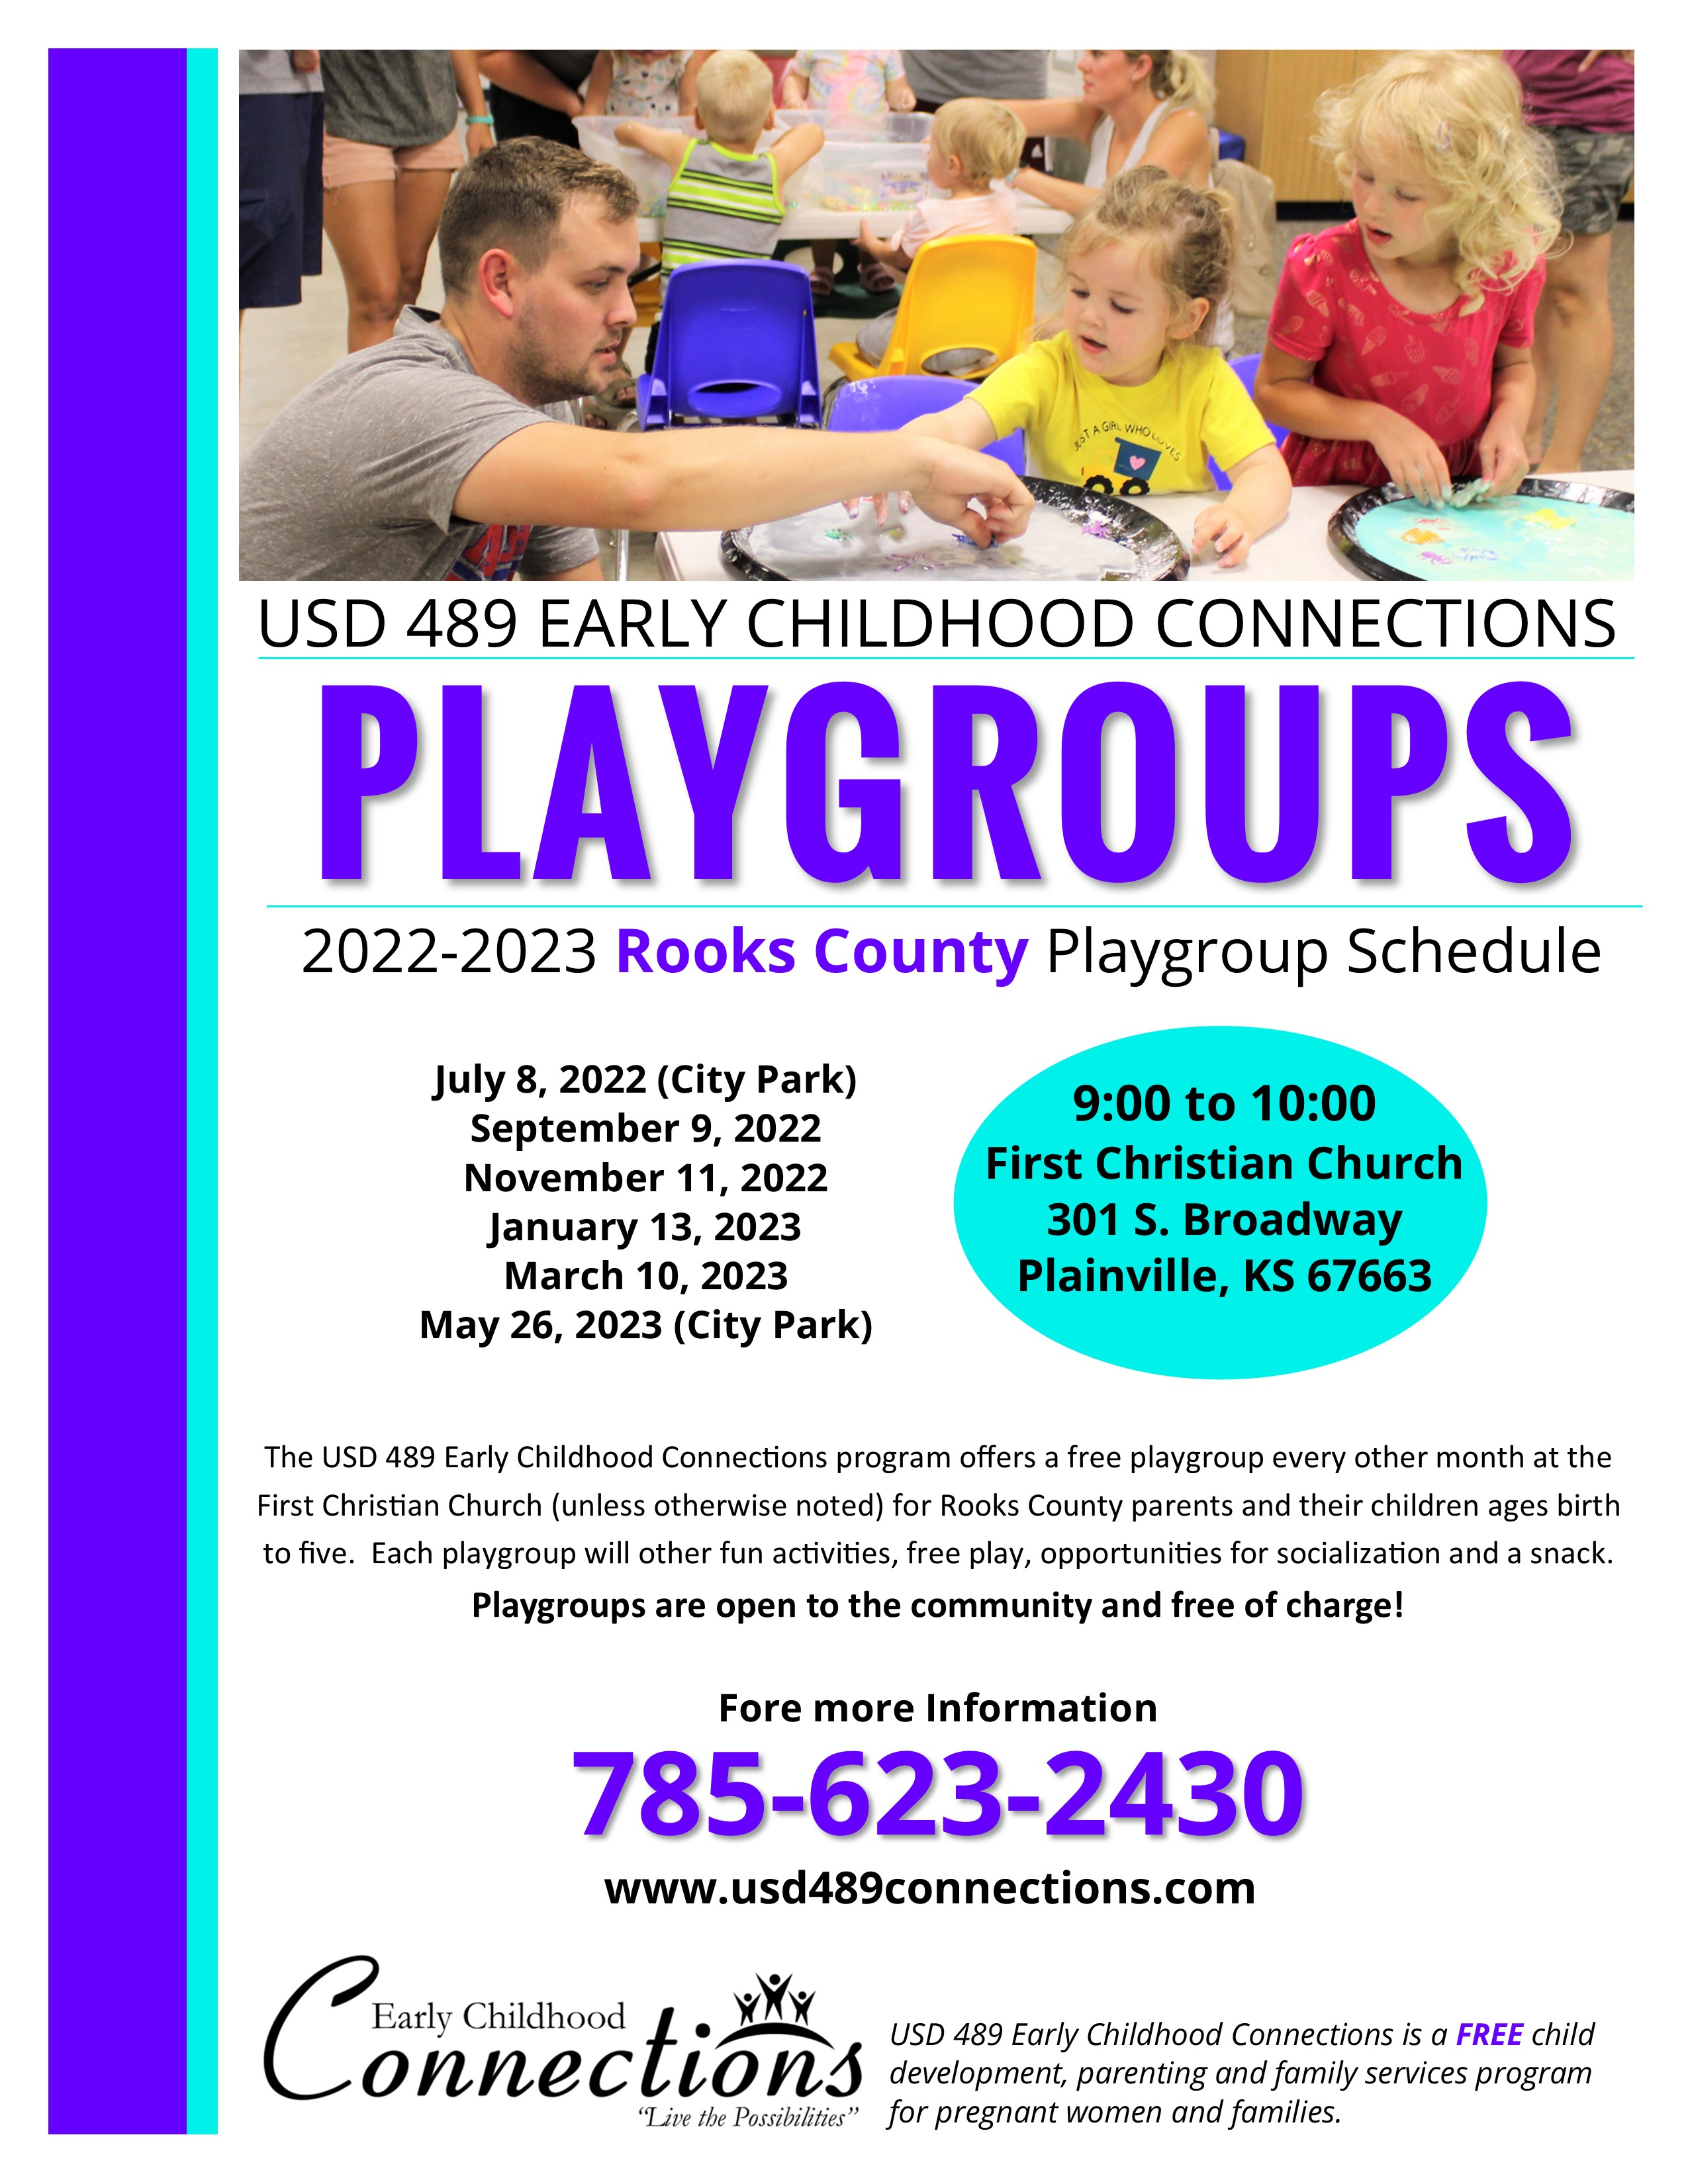 Rooks Playgroup Schedule